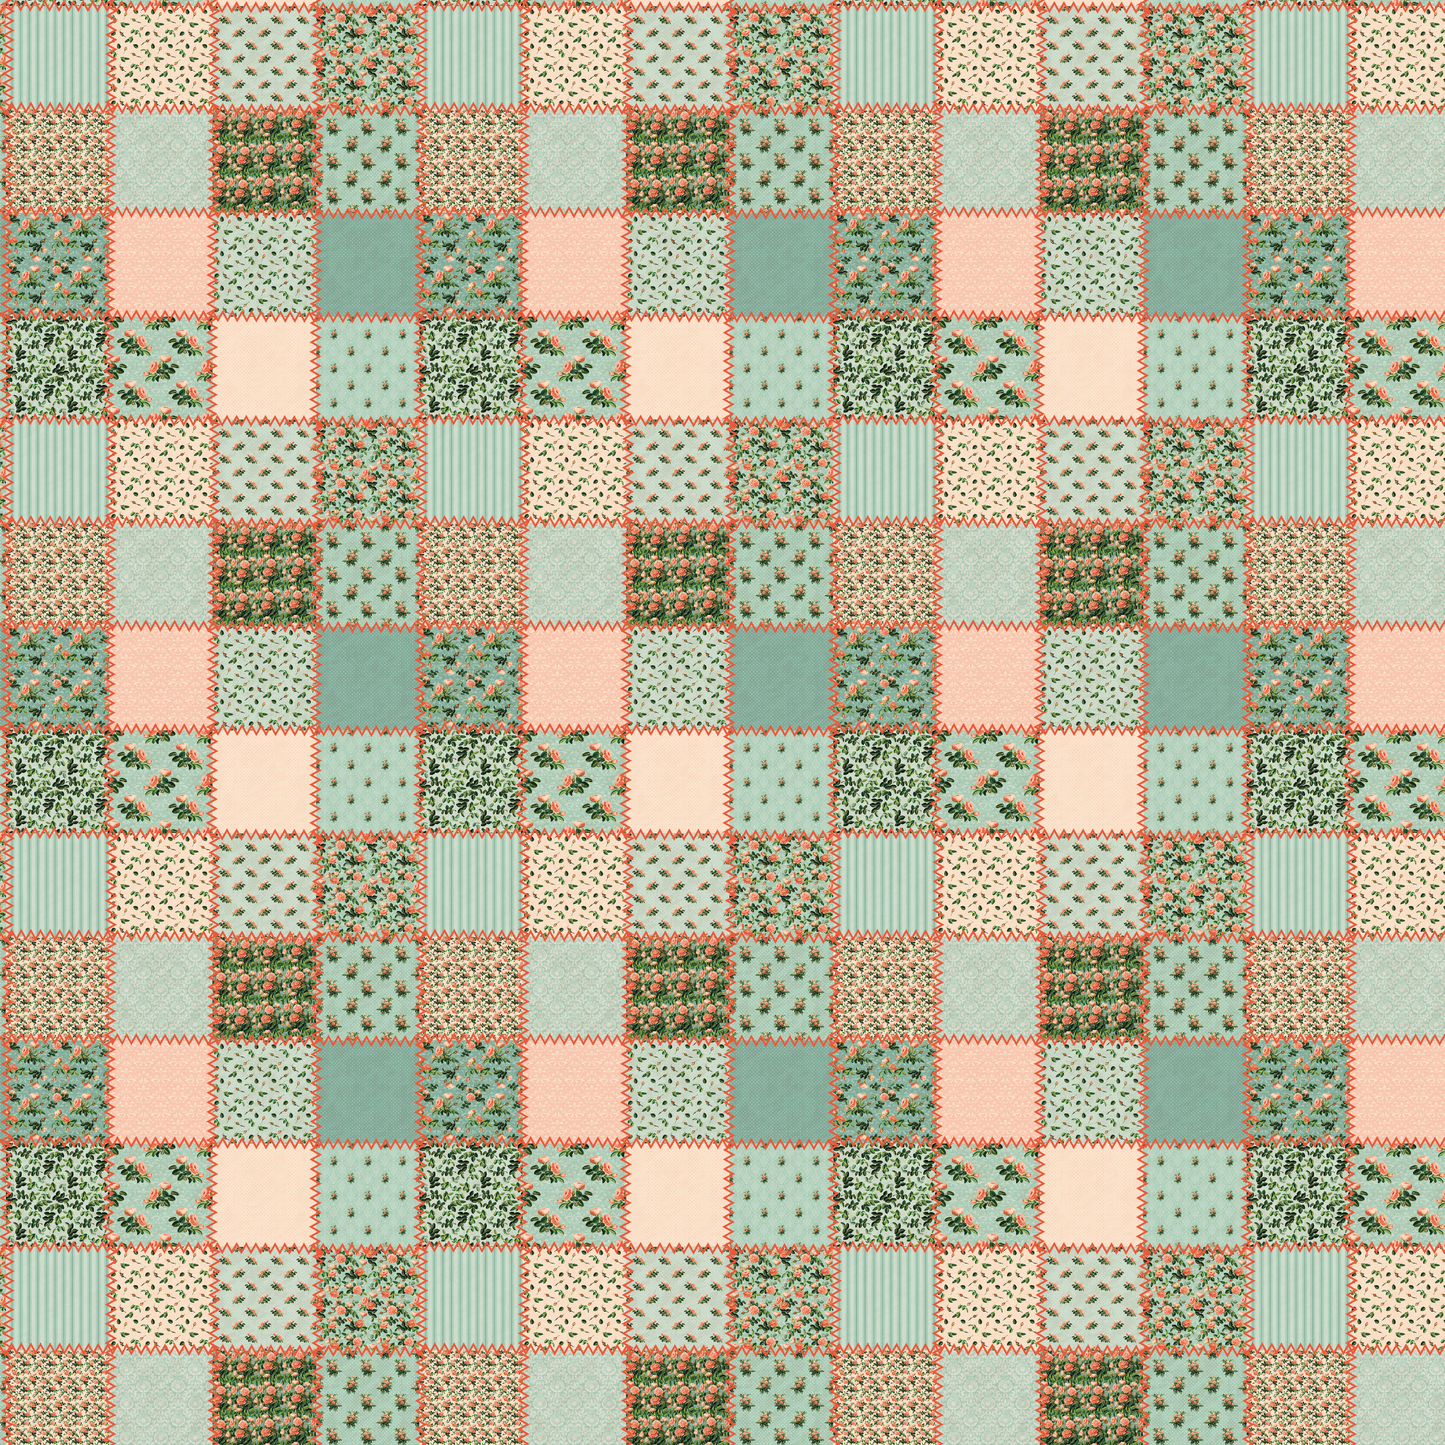 Patchwork - Peach and Teal 014